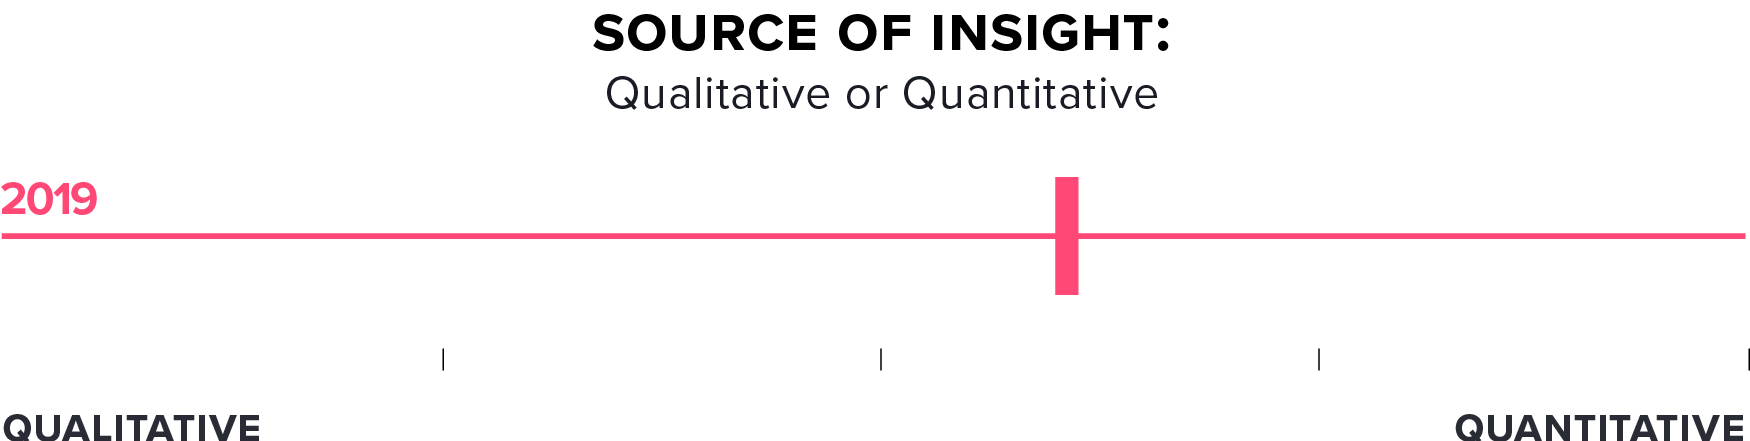 Survey Results Chart: Source of Product Insight: Qualitative or Quantitative